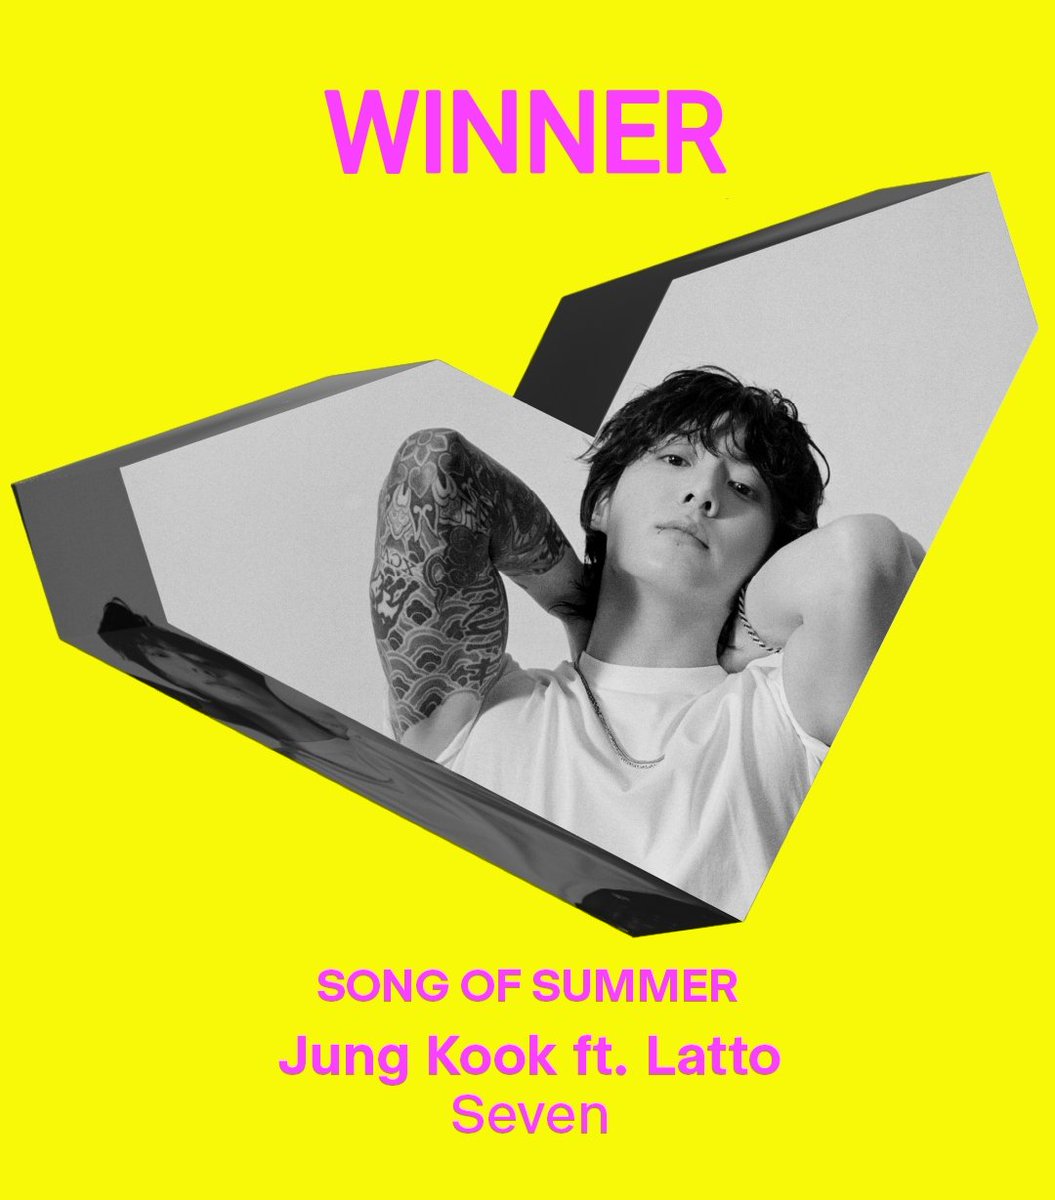 #Jungkook's #SEVEN ft. #Latto wins the #MTVVMA for #SongOfTheSummer and Jungkook makes more history!  💪🔥🐐👑🖤
1ST KOREAN SOLOIST to win a VMA
1ST KPOP MALE SOLOIST to win a VMA
1ST KPOP SOLOIST to win a non-kpop VMA